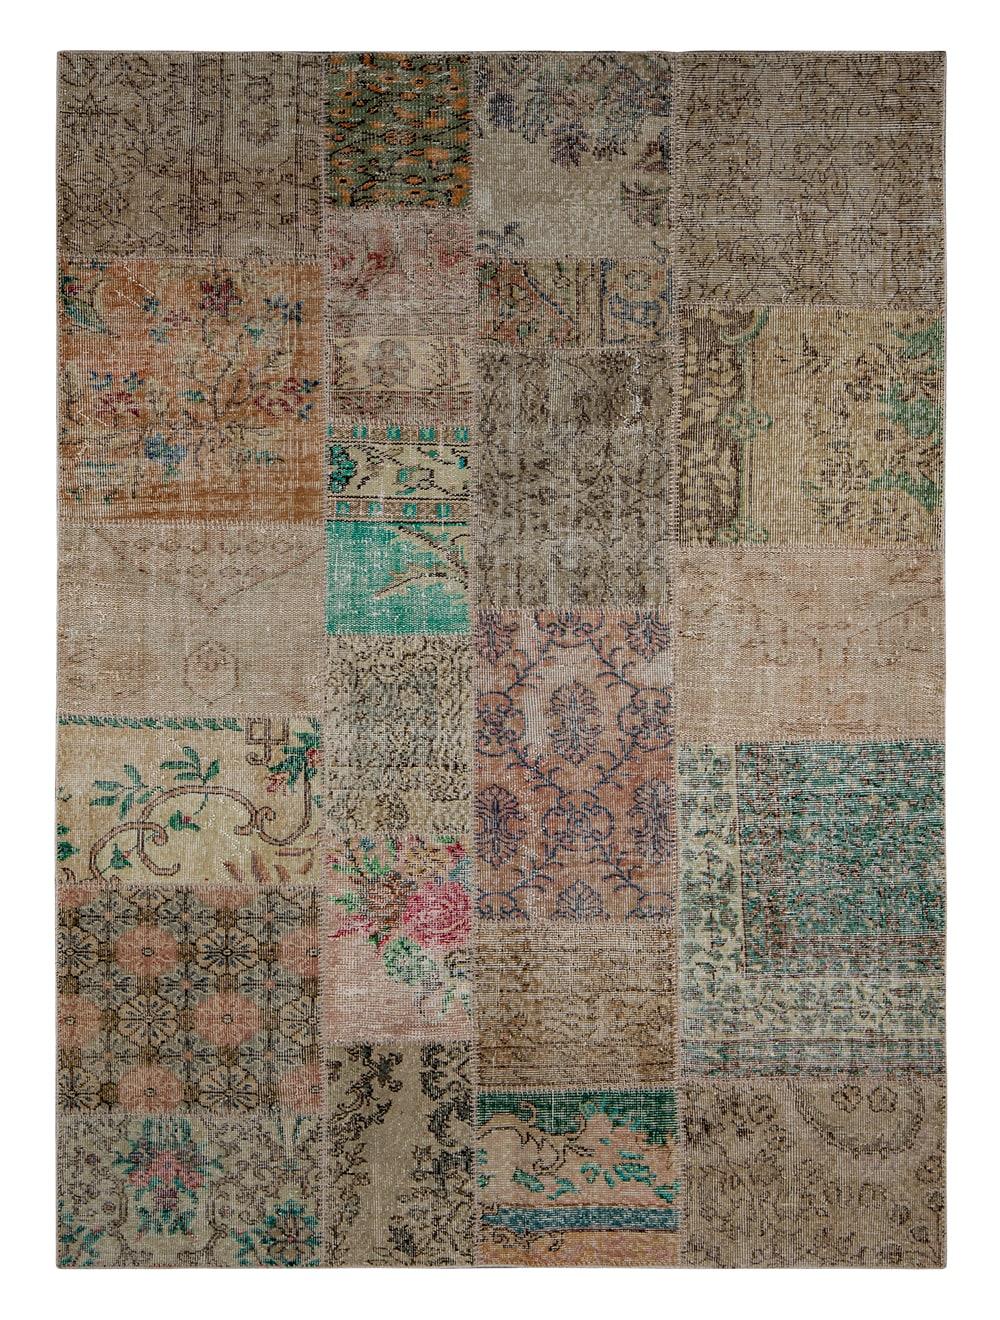 Natural light Vintage carpet by Massimo Copenhagen.
Handknotted
Materials: 100% Wool
Dimensions: W 300 x H 400 cm
Available colors: Natural Light, natural strong, grey.
Other dimensions are available: 80x250 cm, 140x200 cm, 170x240 cm, 200x300